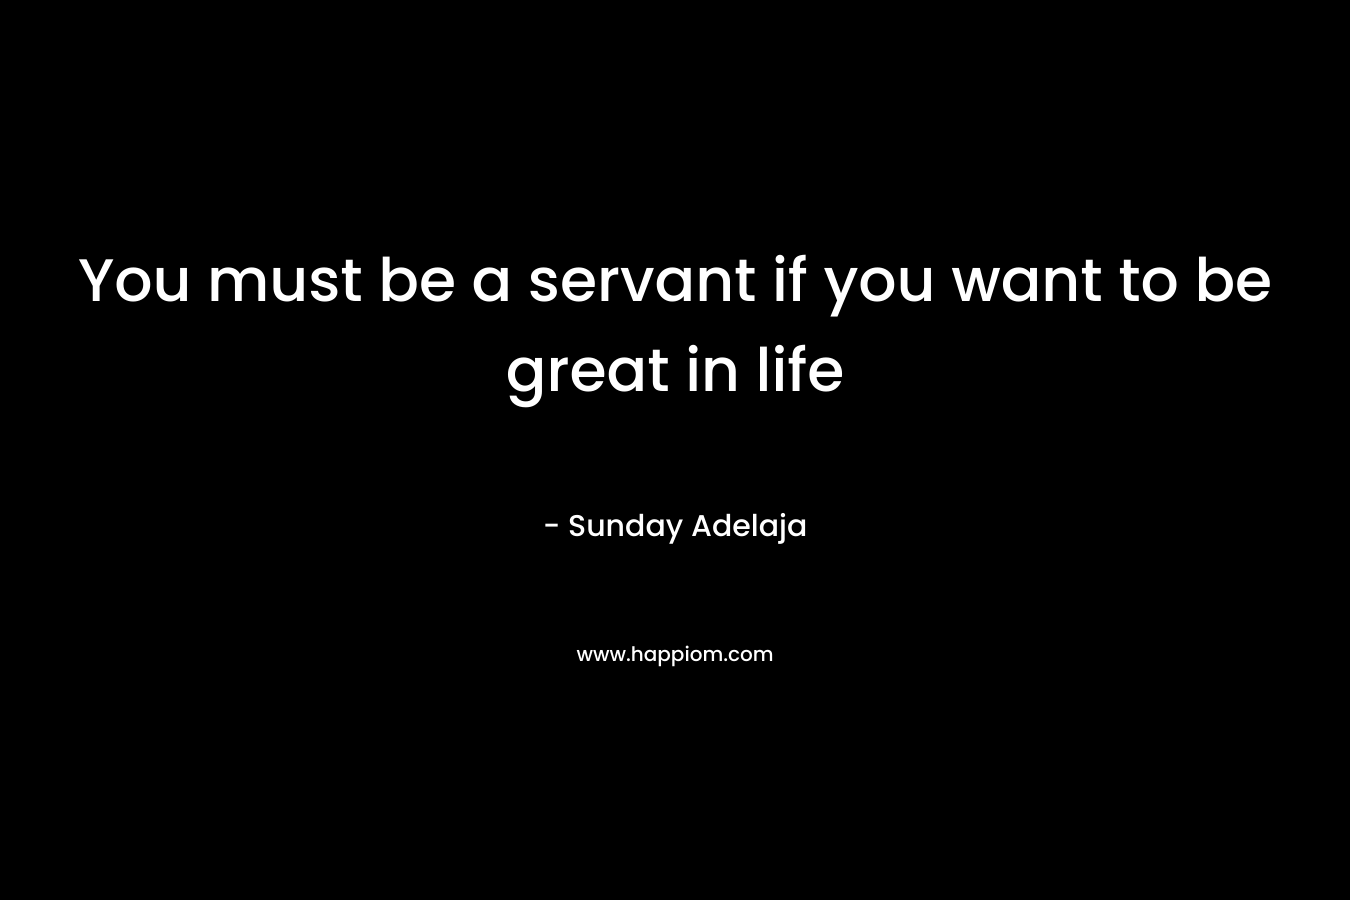 You must be a servant if you want to be great in life